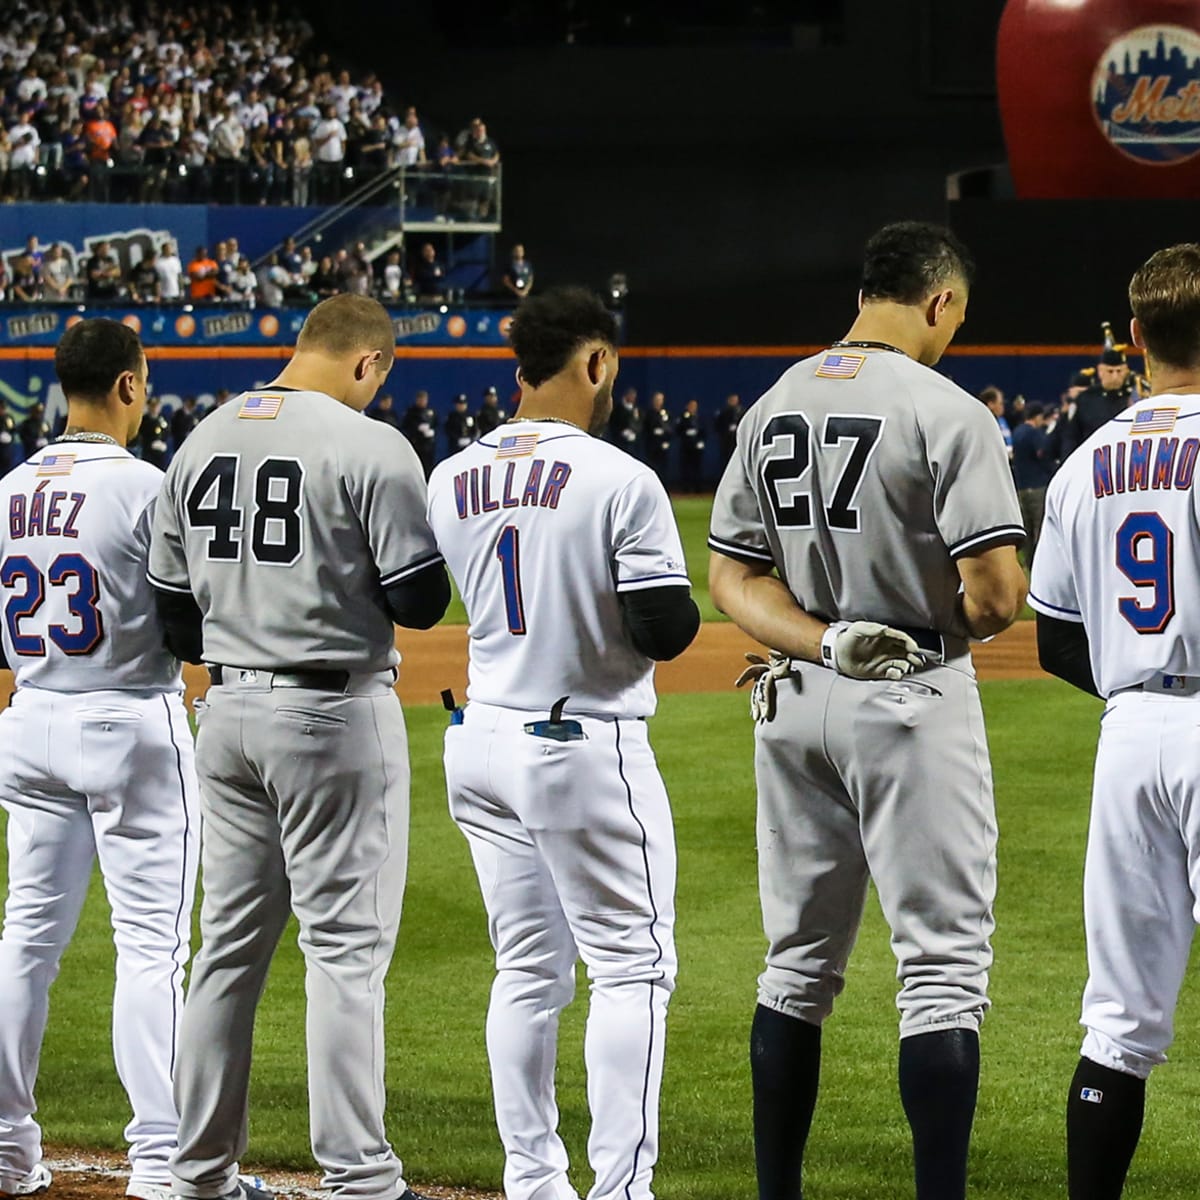 NY Mets in remembrance of 9/11